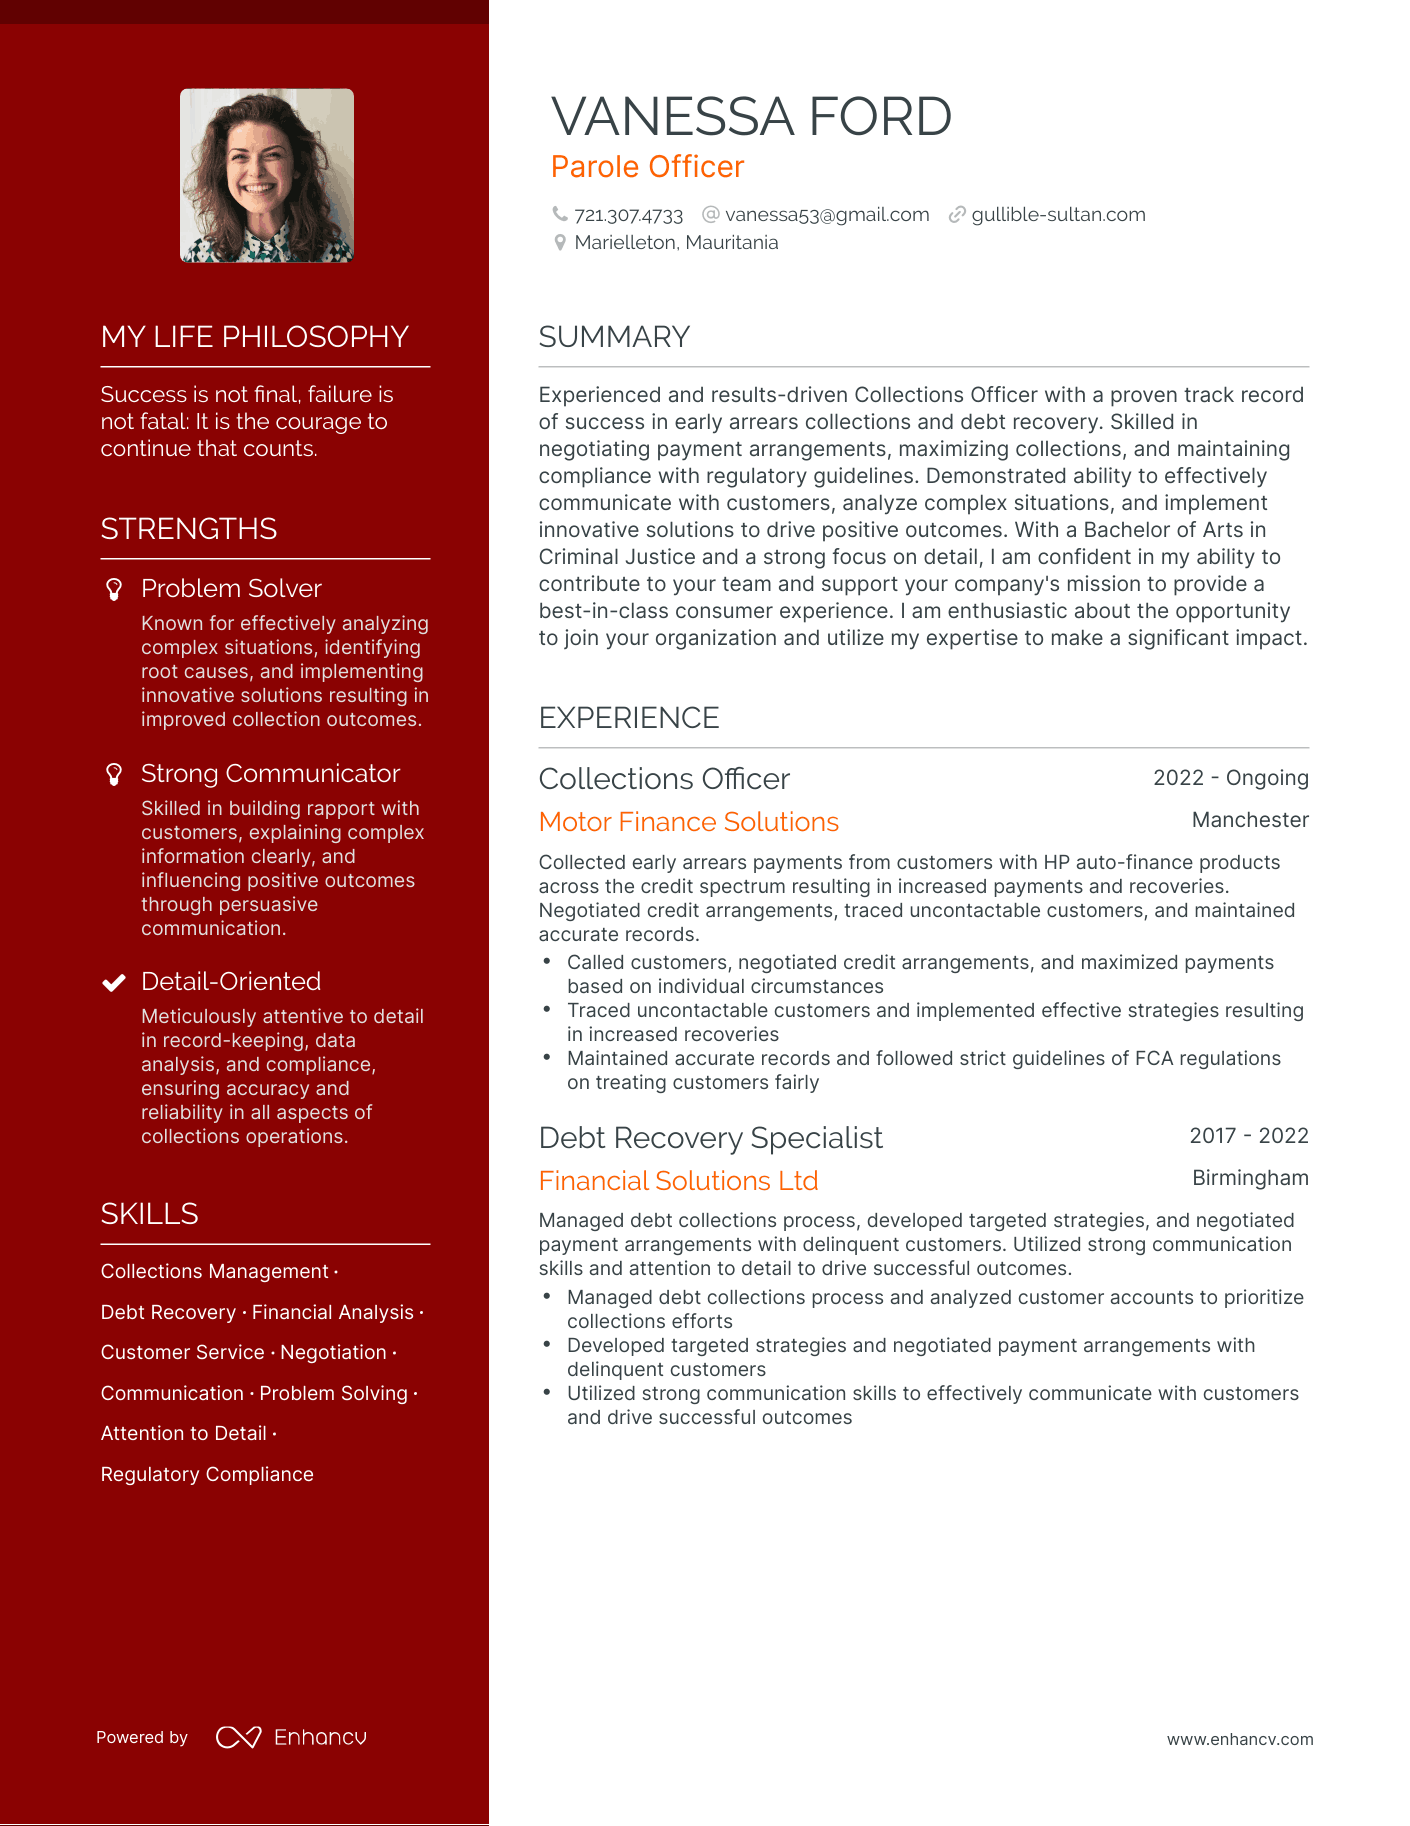 Parole Officer resume example